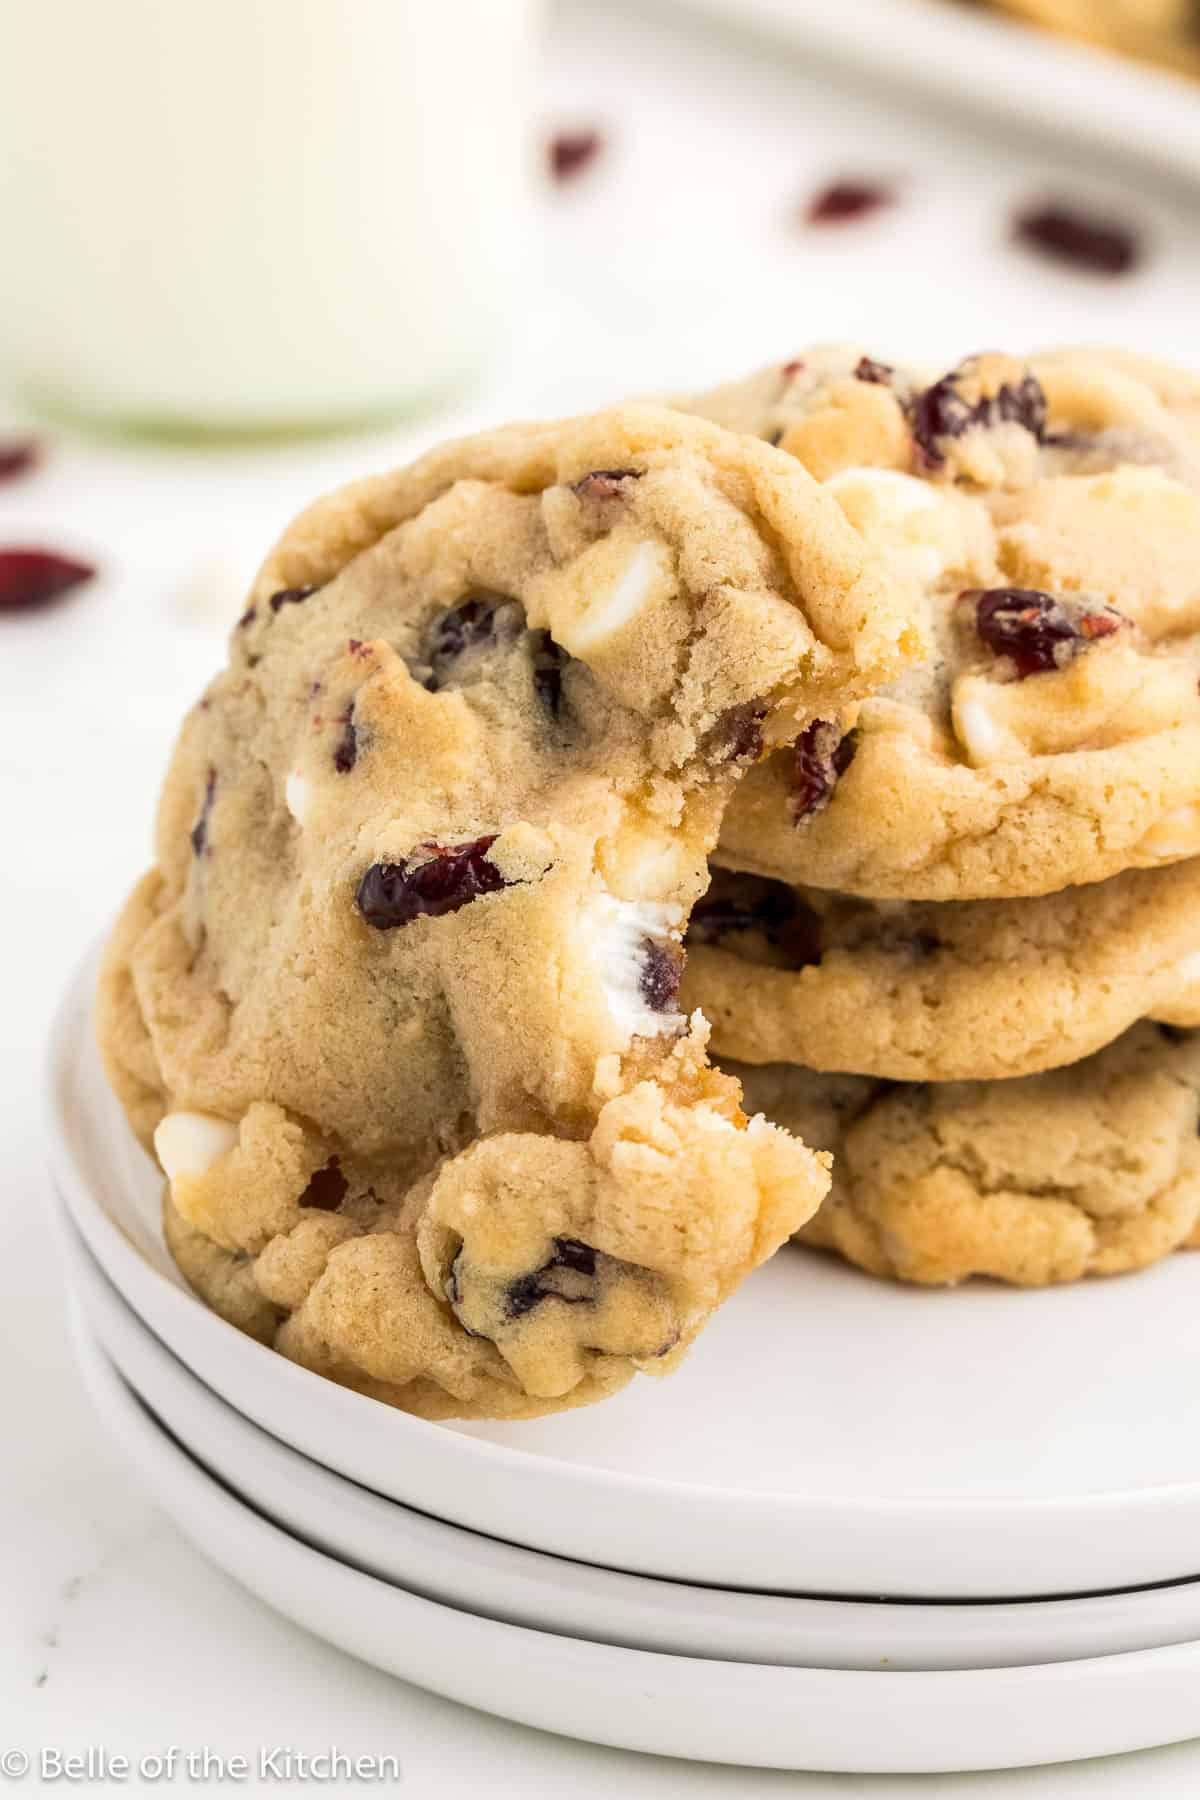 a stack of cookies on a plate with one showing a bite taken out.